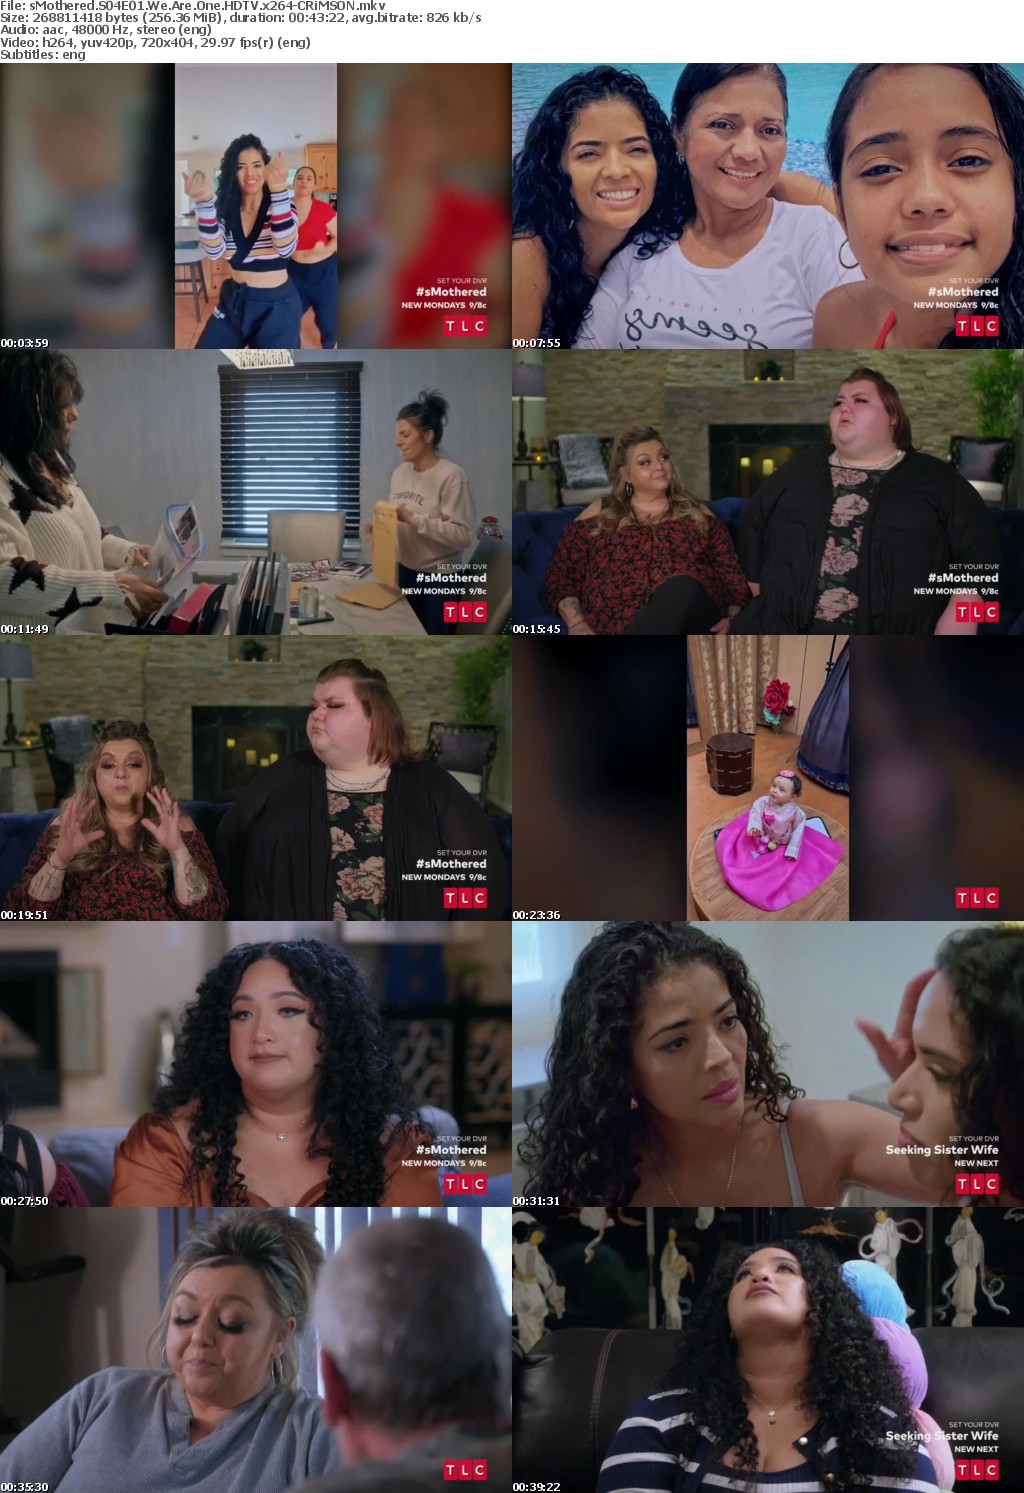 sMothered S04E01 We Are One HDTV x264-CRiMSON